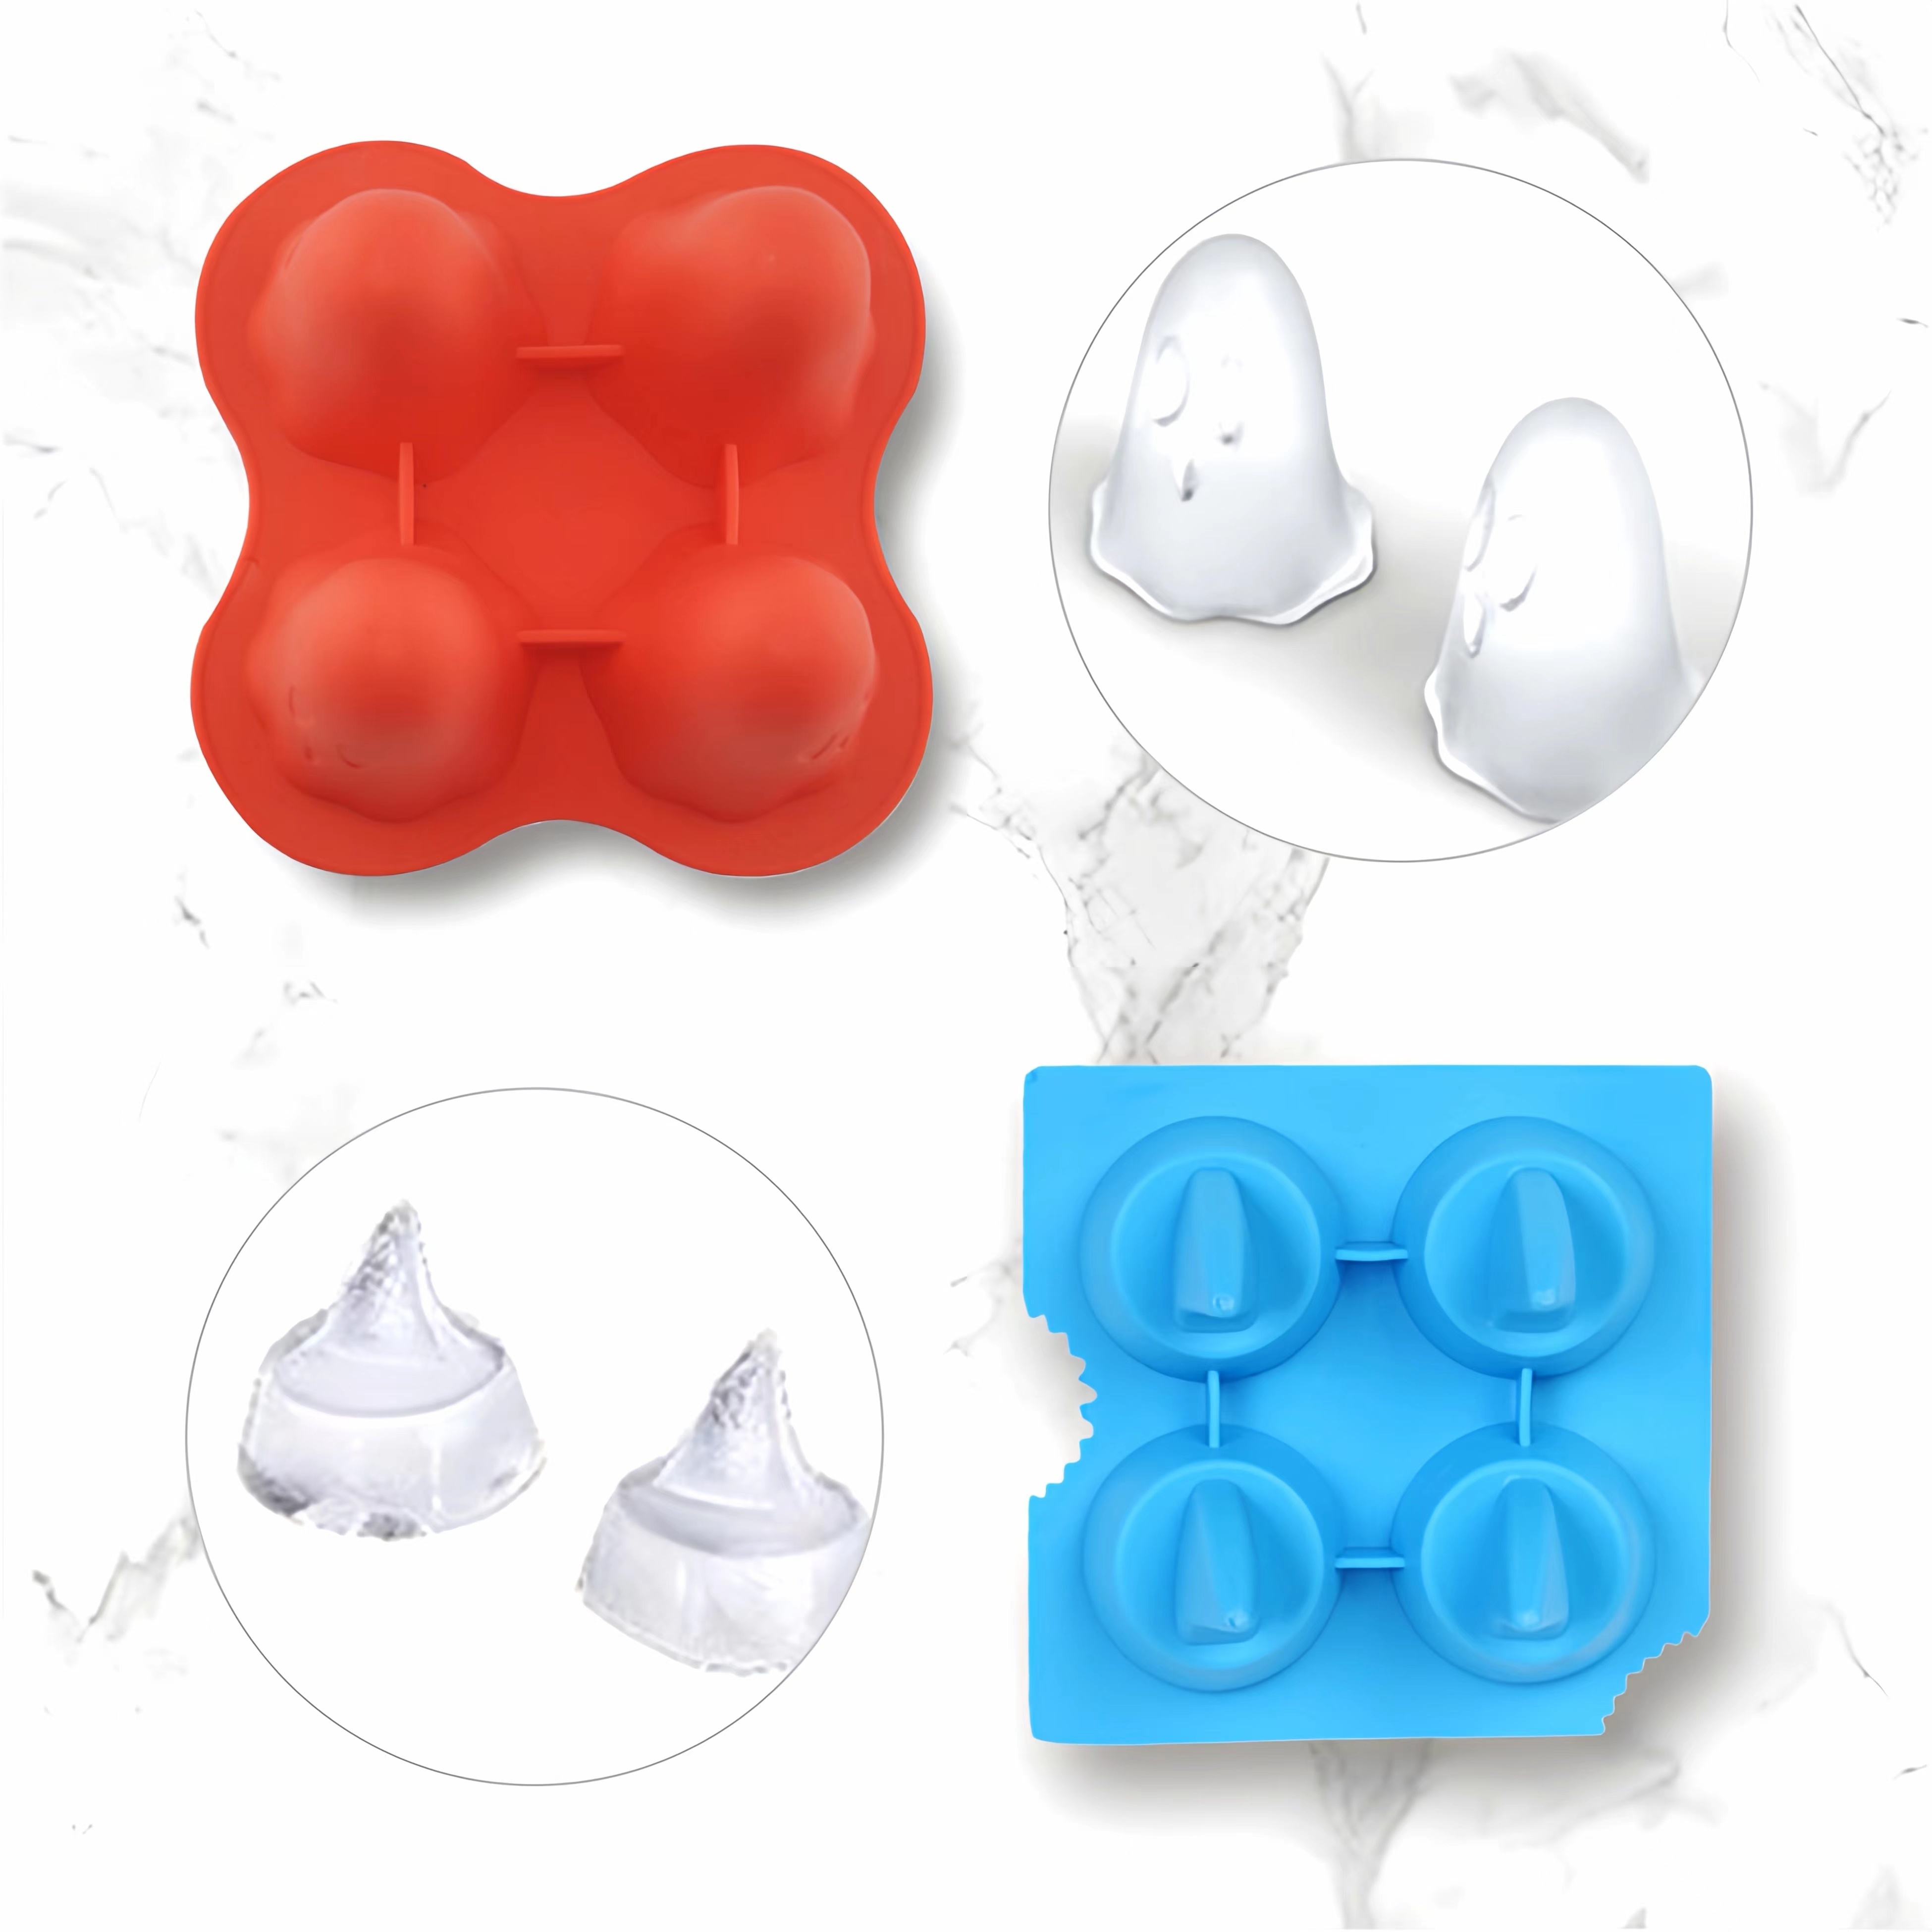 True Mini Silicone Ice Tray, Miniature Ice Cubes, Mold For Soap, Candles,  Jell-o, Dishwasher Safe : Target